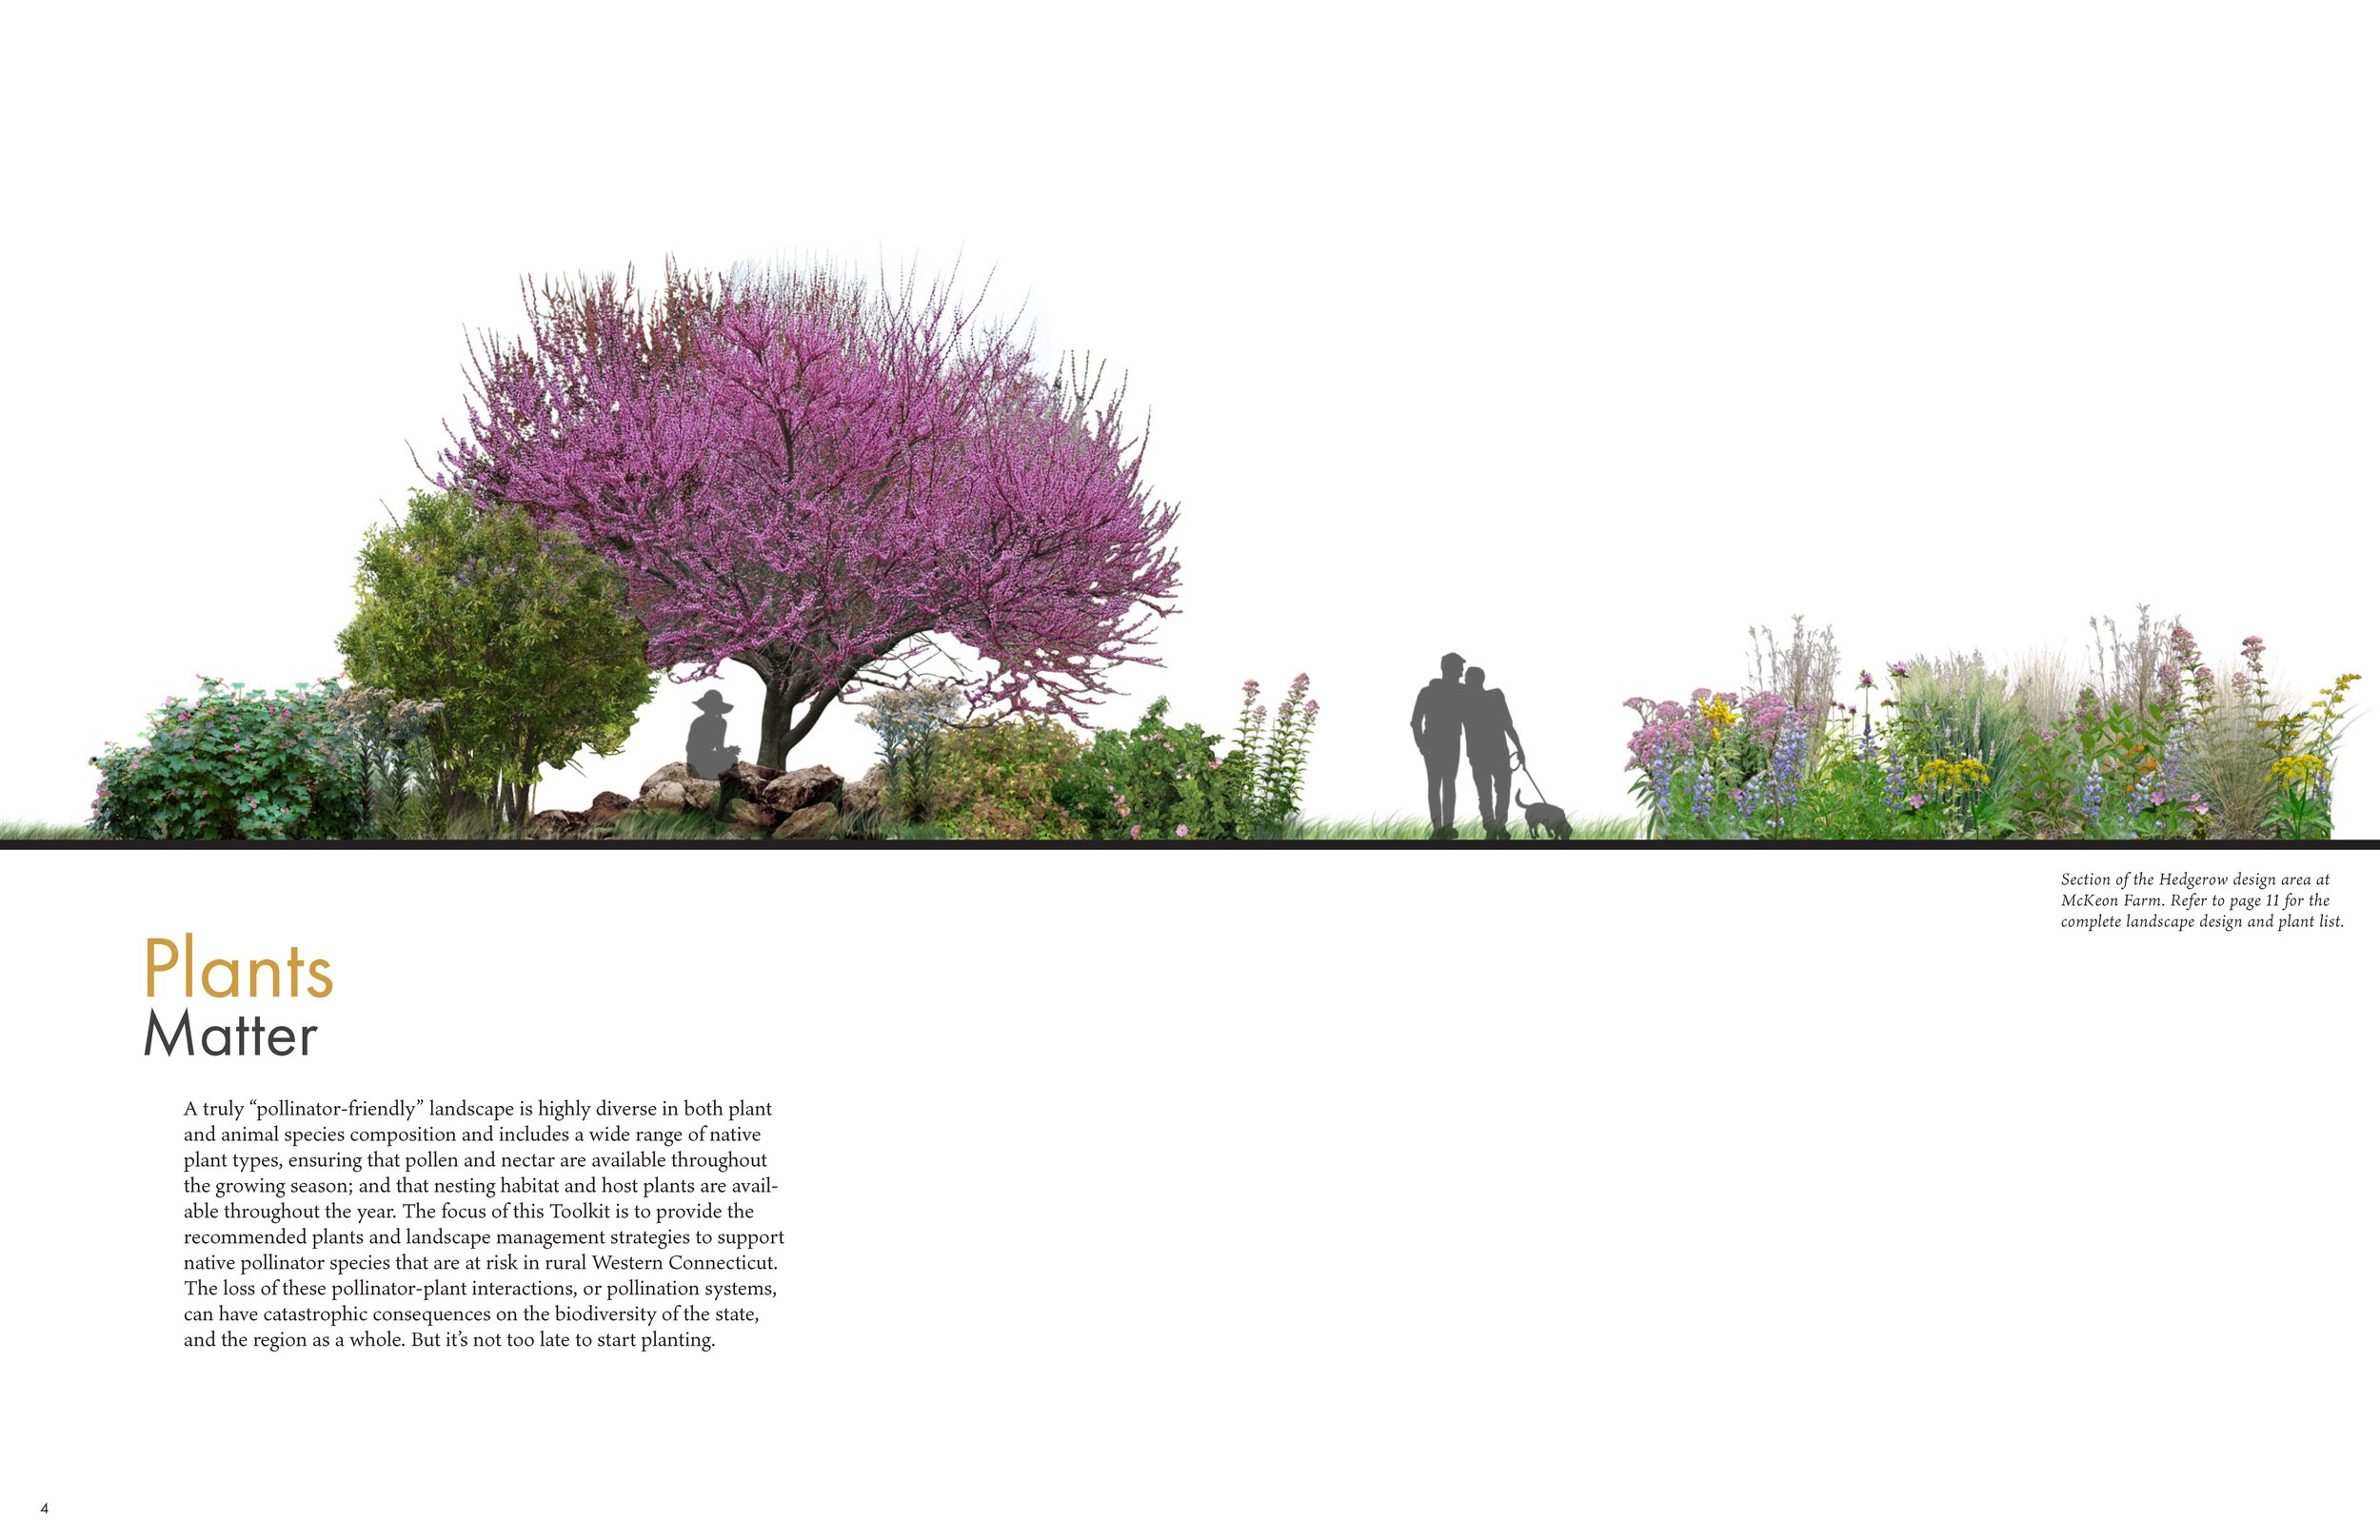 Pages from LandscapeInteractions_McKeonFarm_Toolkit_v8_Page_2.jpg